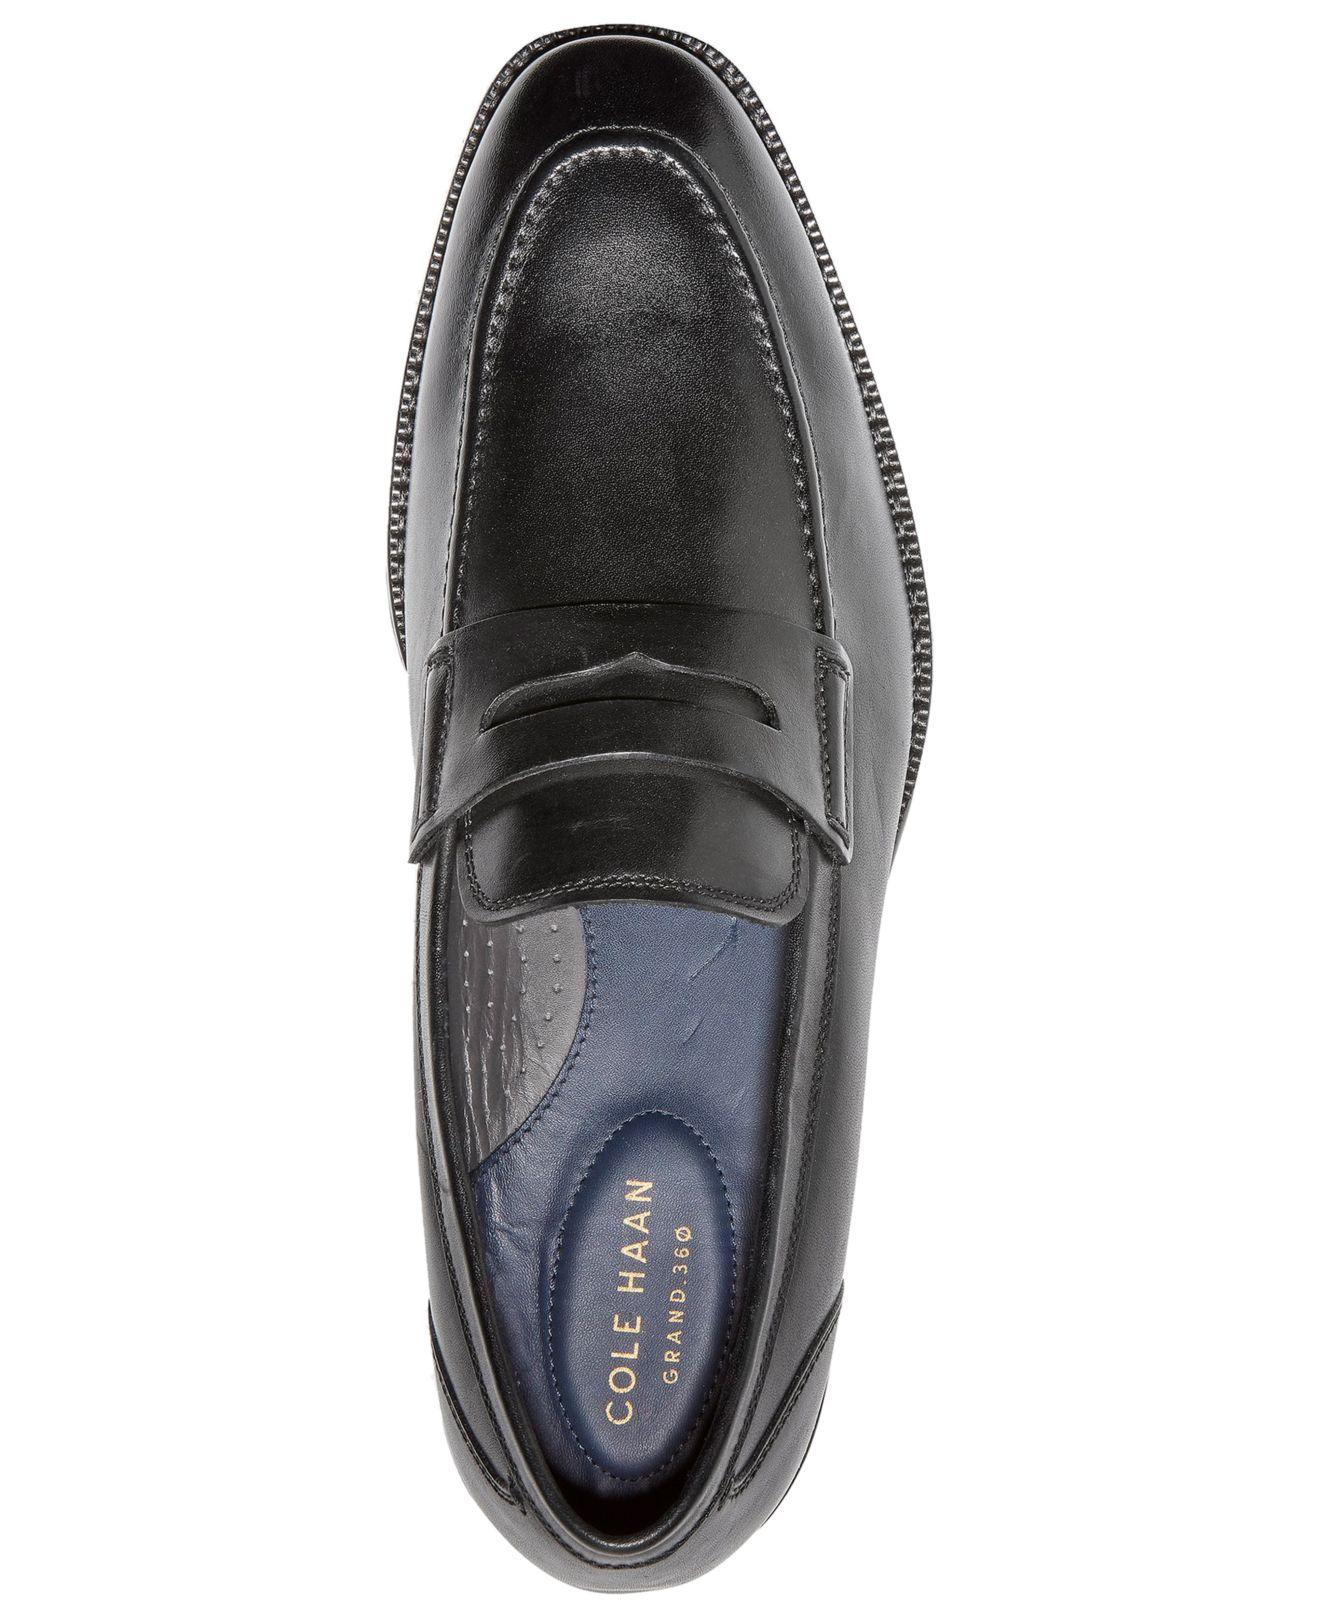 Cole Haan Leather Warner Grand Penny Loafers in Black for Men - Lyst